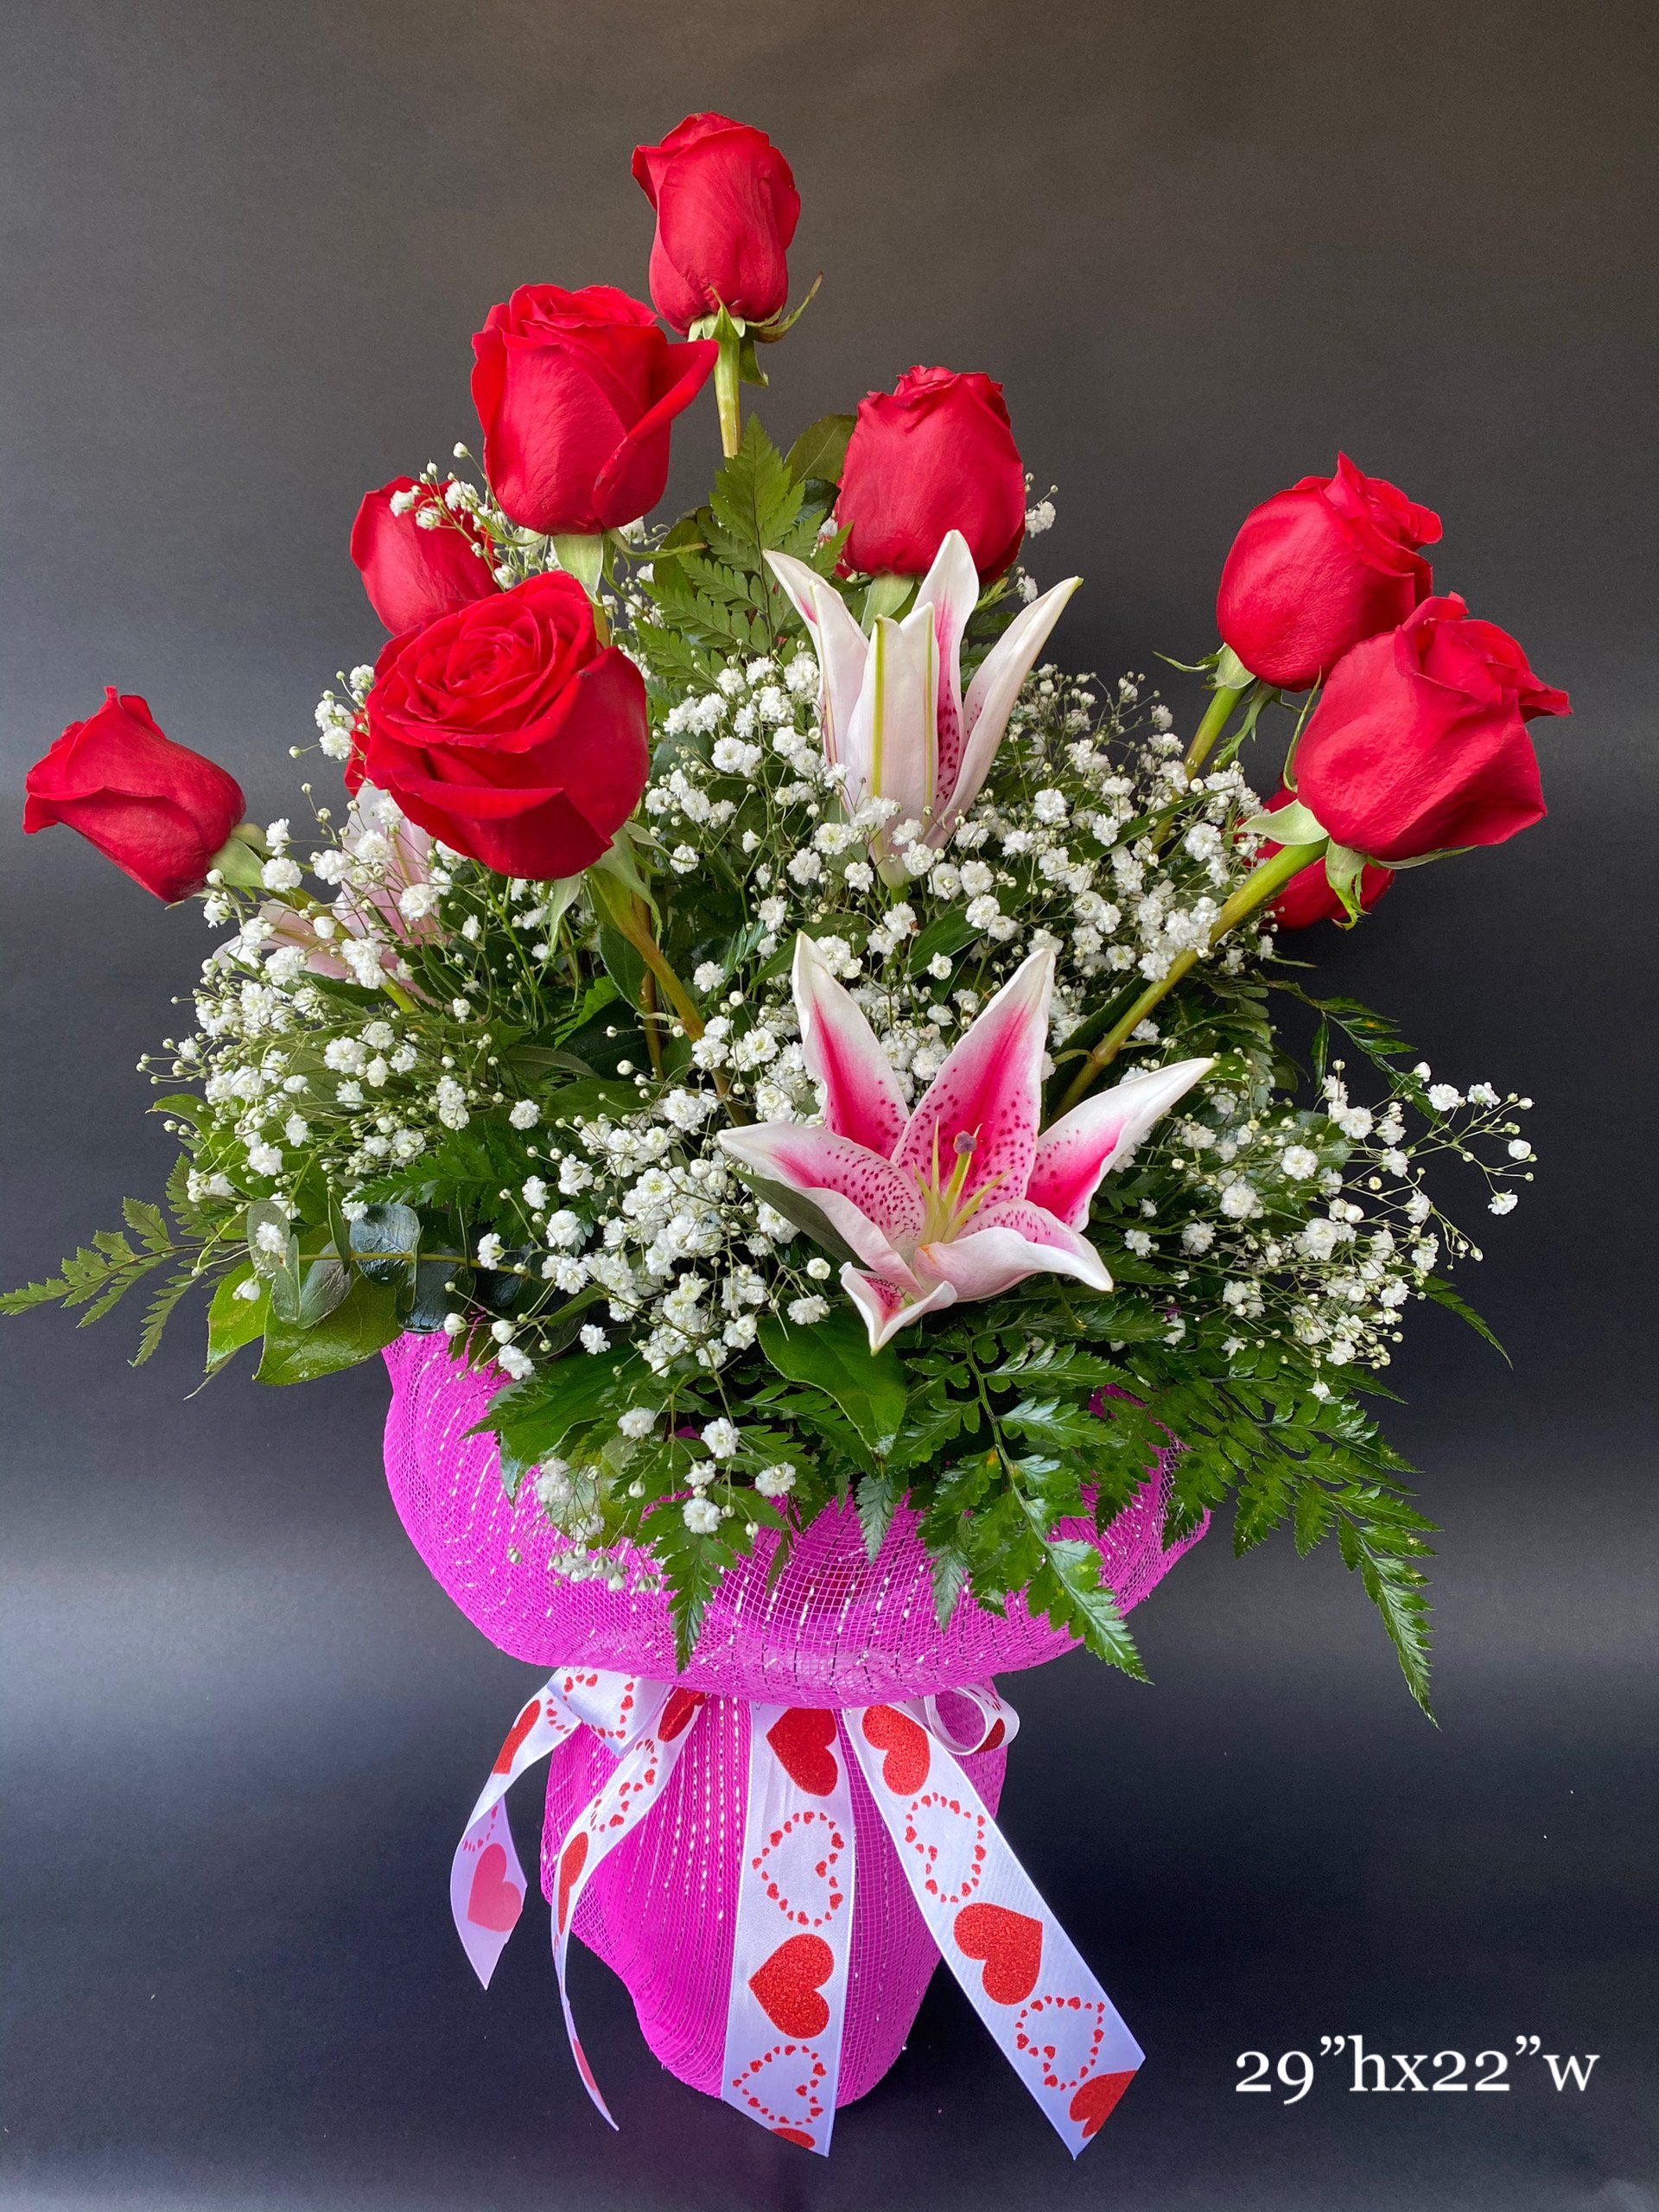 Blooming Roses With Love
$149.99 + Tax